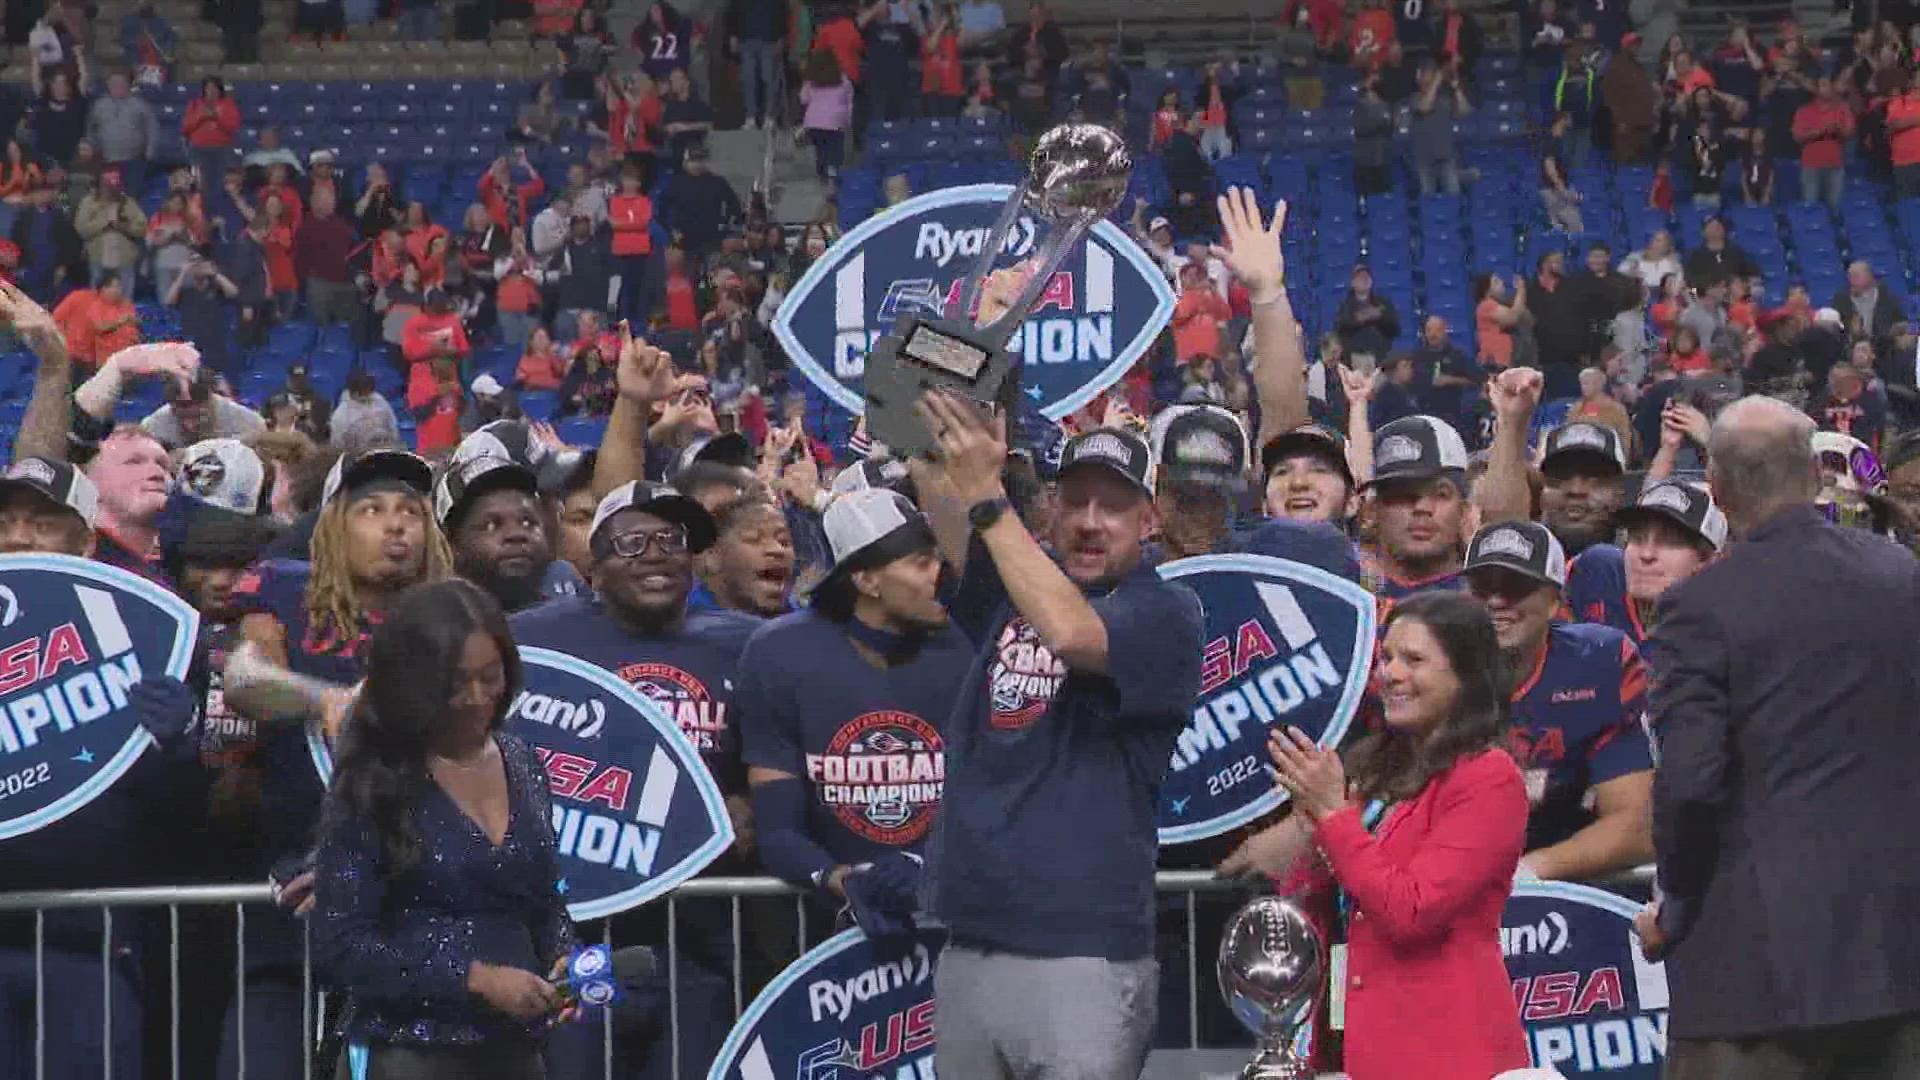 UTSA's football and soccer teams won Conference USA Championships this year and will celebrate with a river parade.